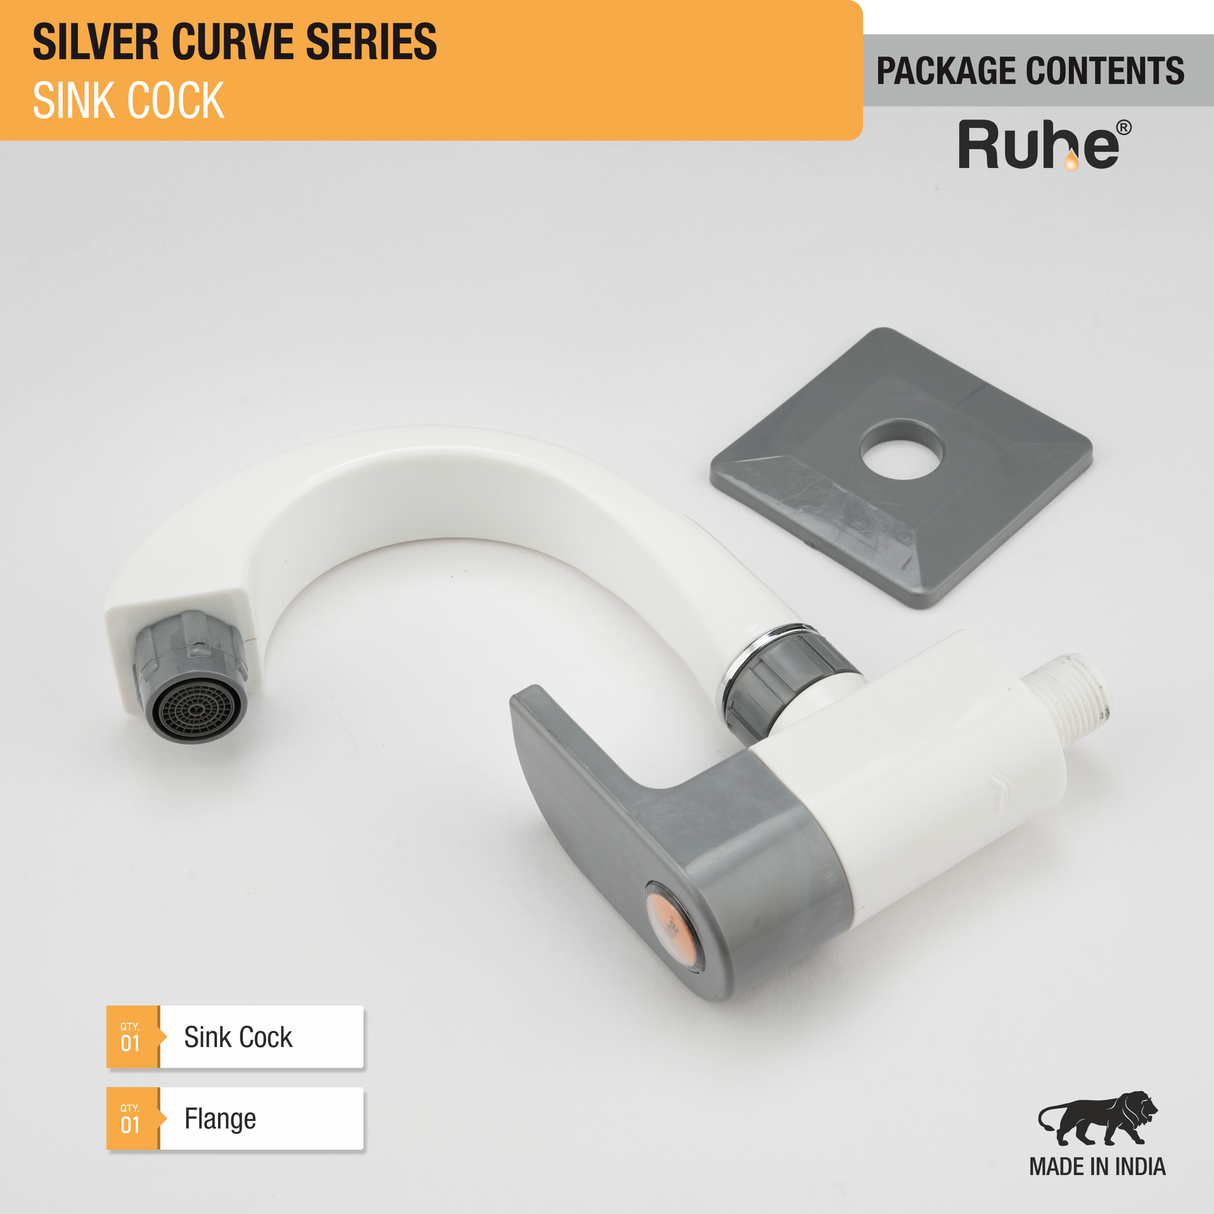 Silver Curve PTMT Sink Cock with Swivel Spout Faucet package contents (sink cock & flange)